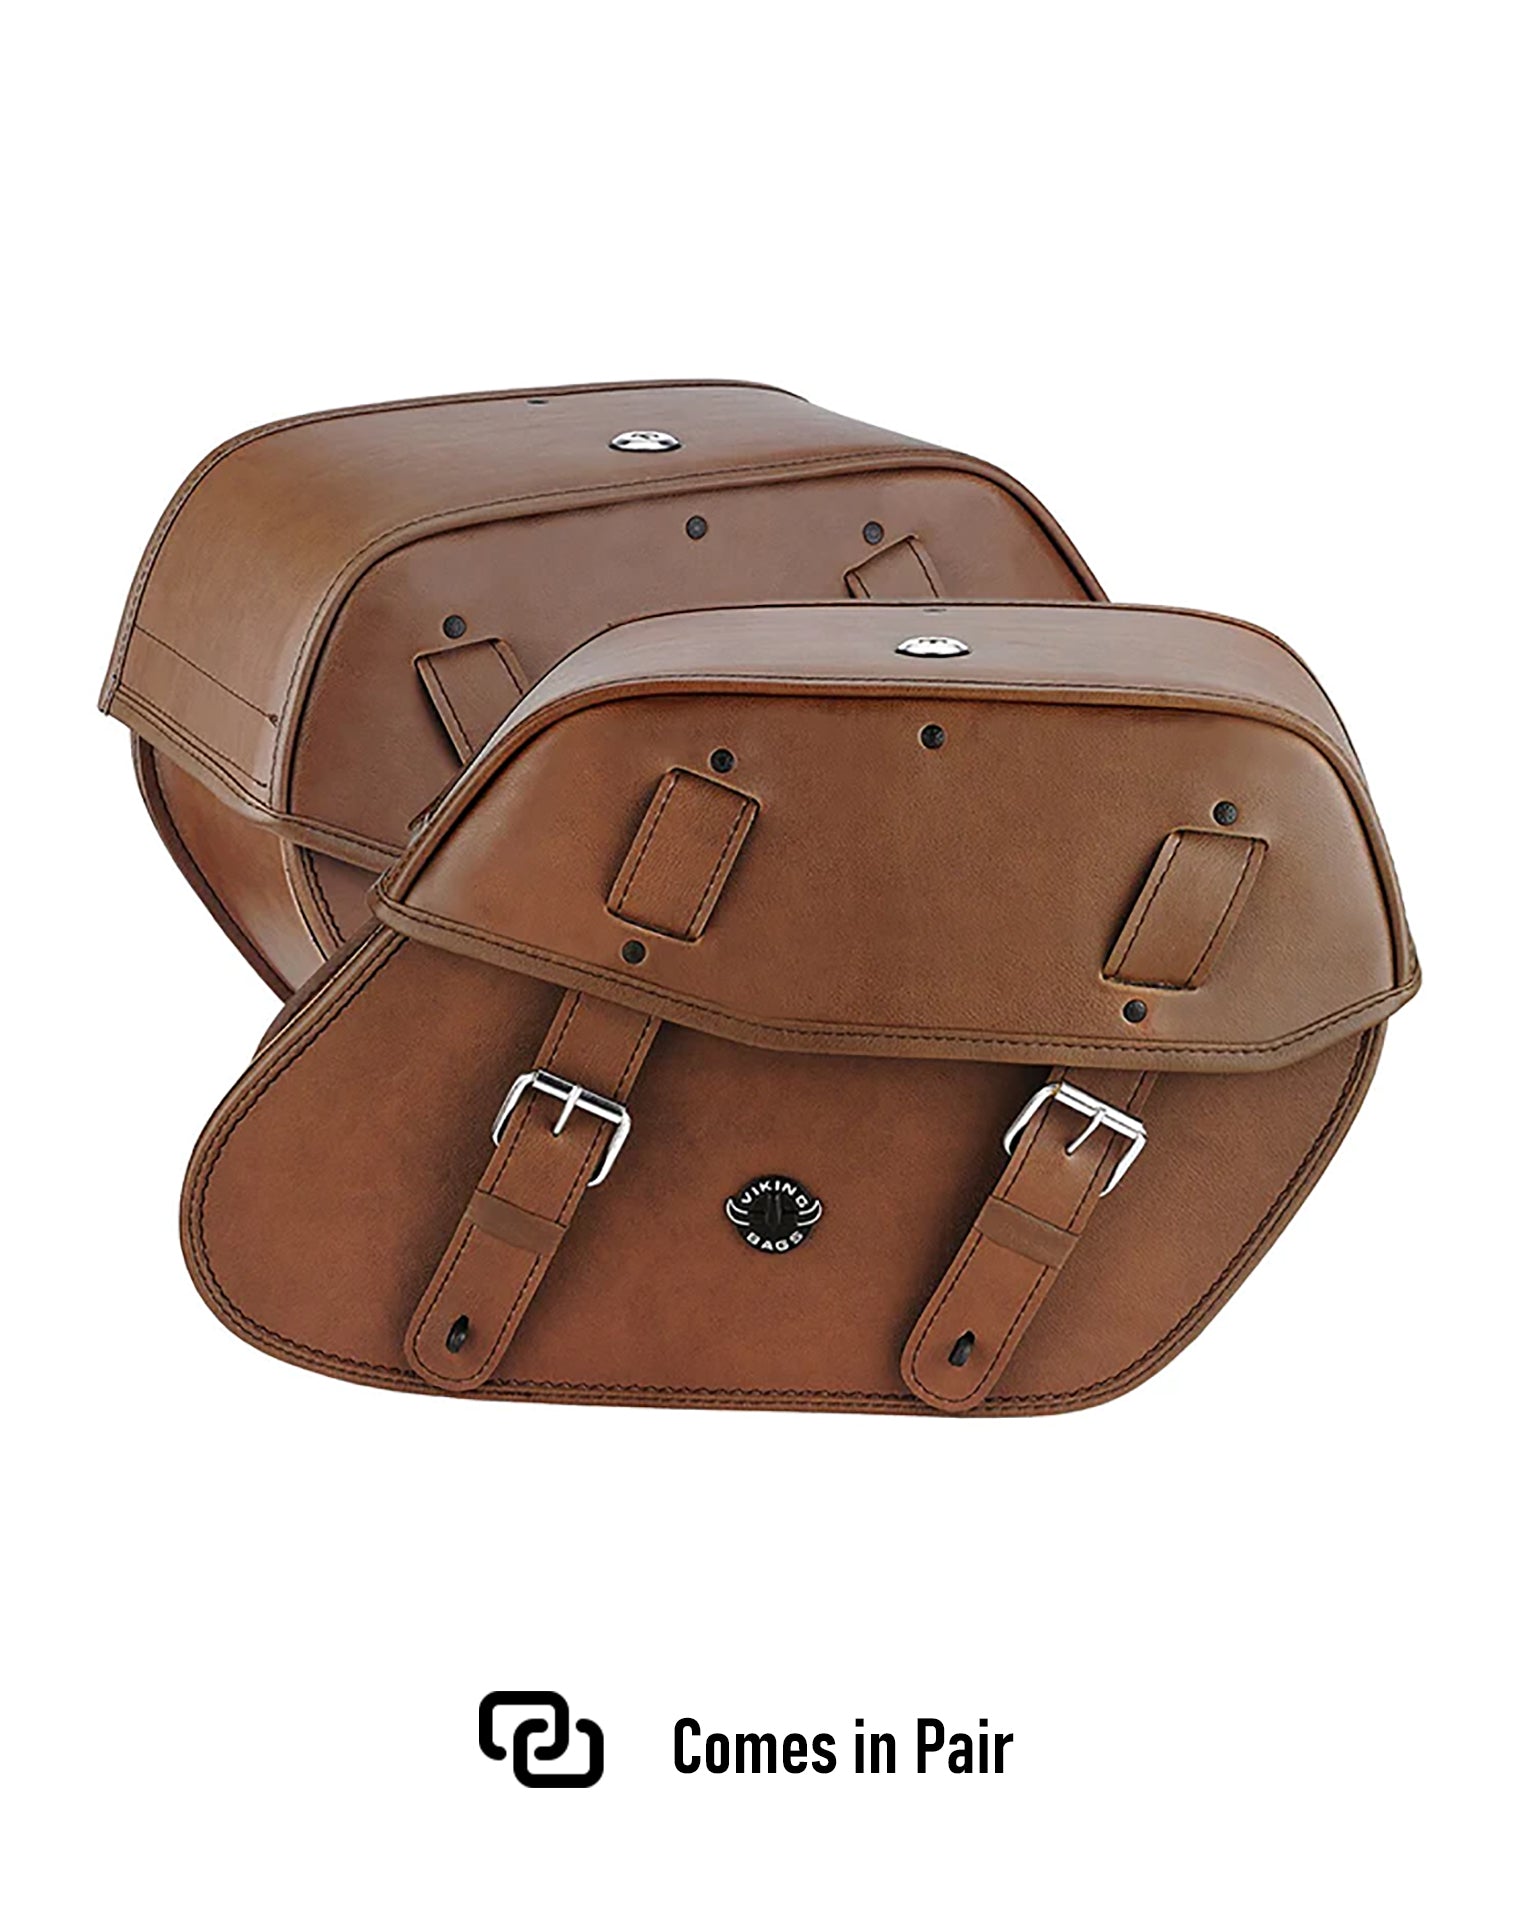 Viking Odin Brown Large Indian Vintage Leather Motorcycle Saddlebags Weather Resistant Bags Comes in Pair